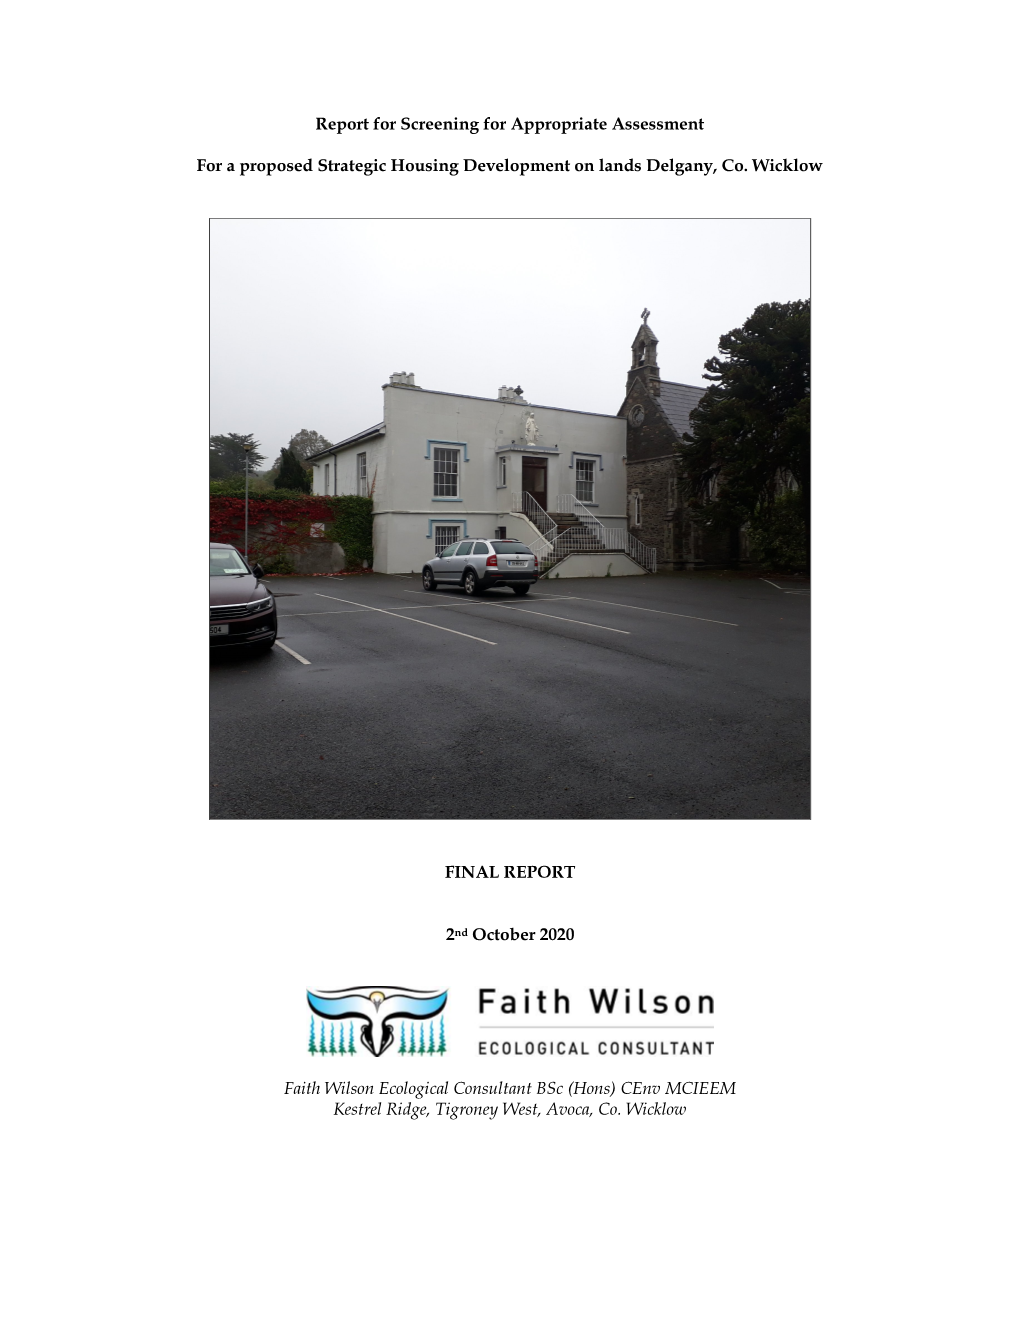 Report for Screening for Appropriate Assessment for a Proposed Strategic Housing Development on Lands Delgany, Co. Wicklow FINA